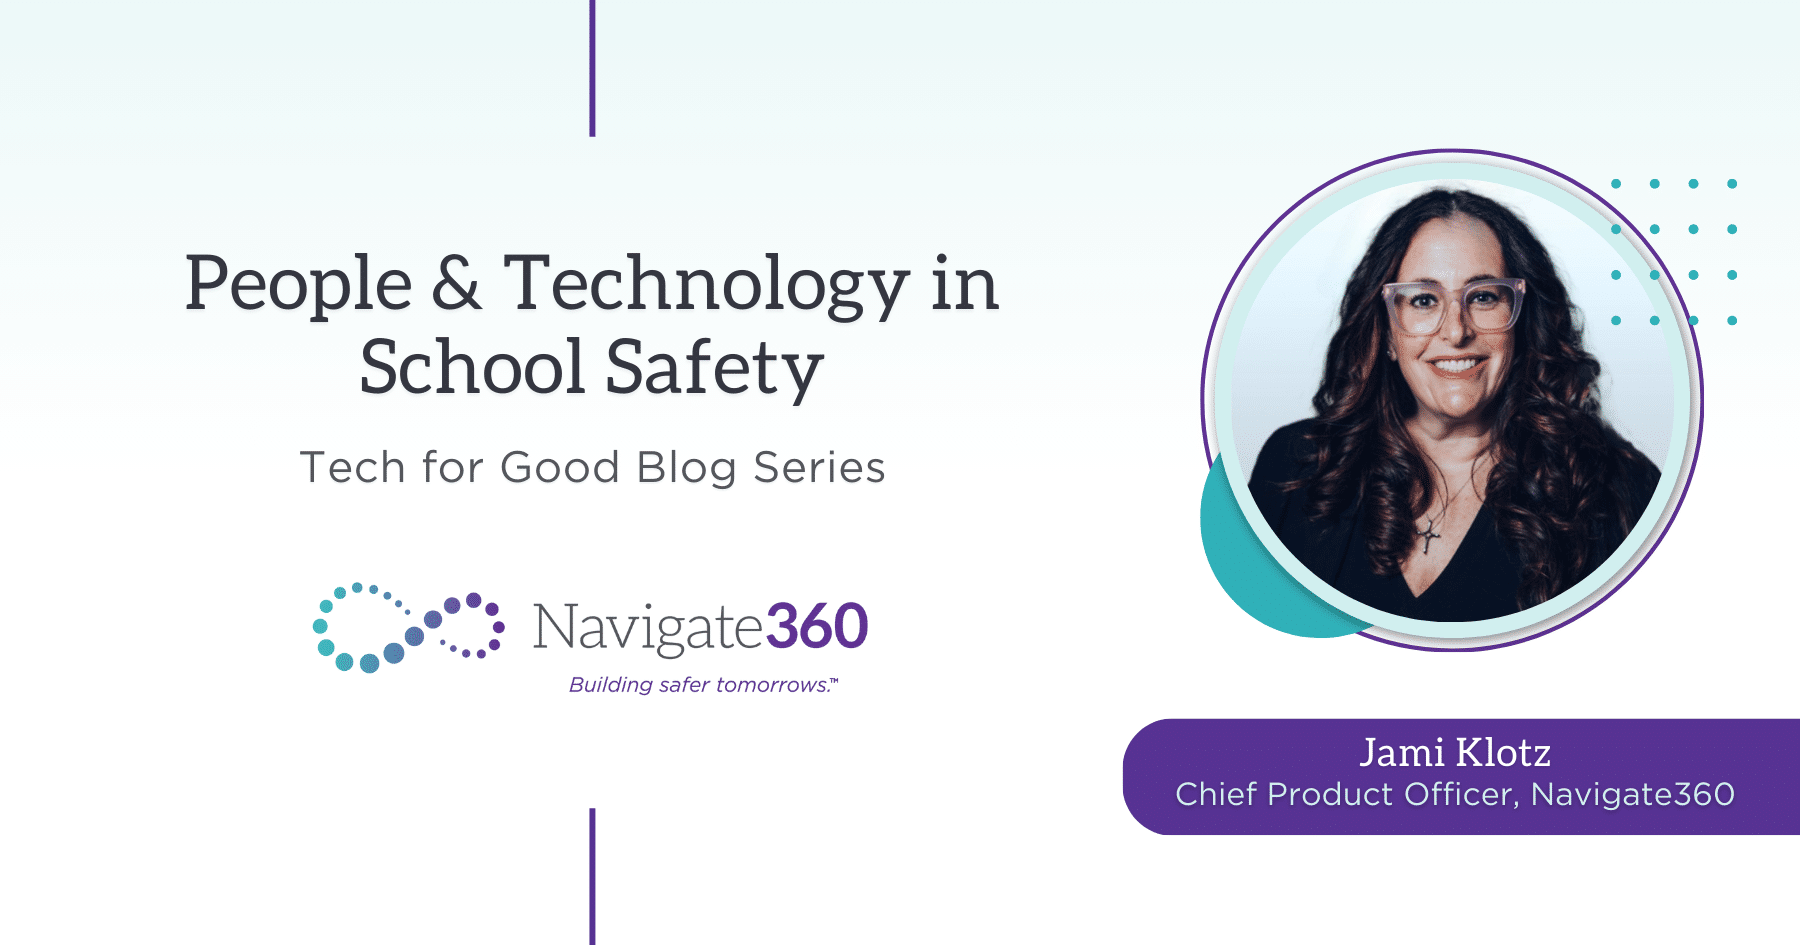 People & Technology in School Safety